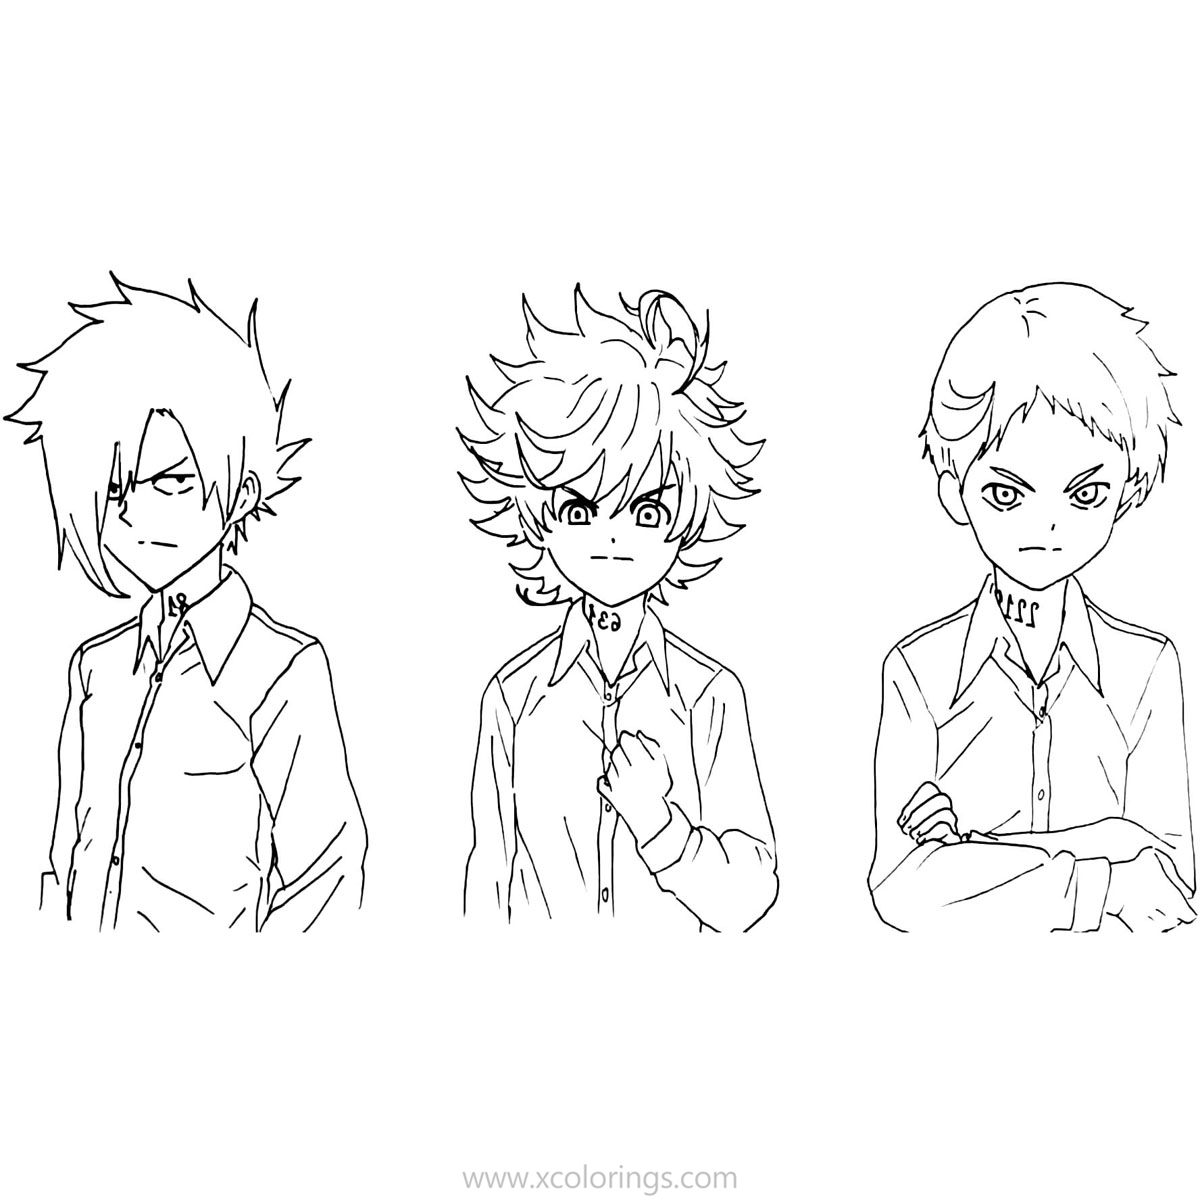 Free The Promised Neverland Coloring Pages Norman Emma Ray printable